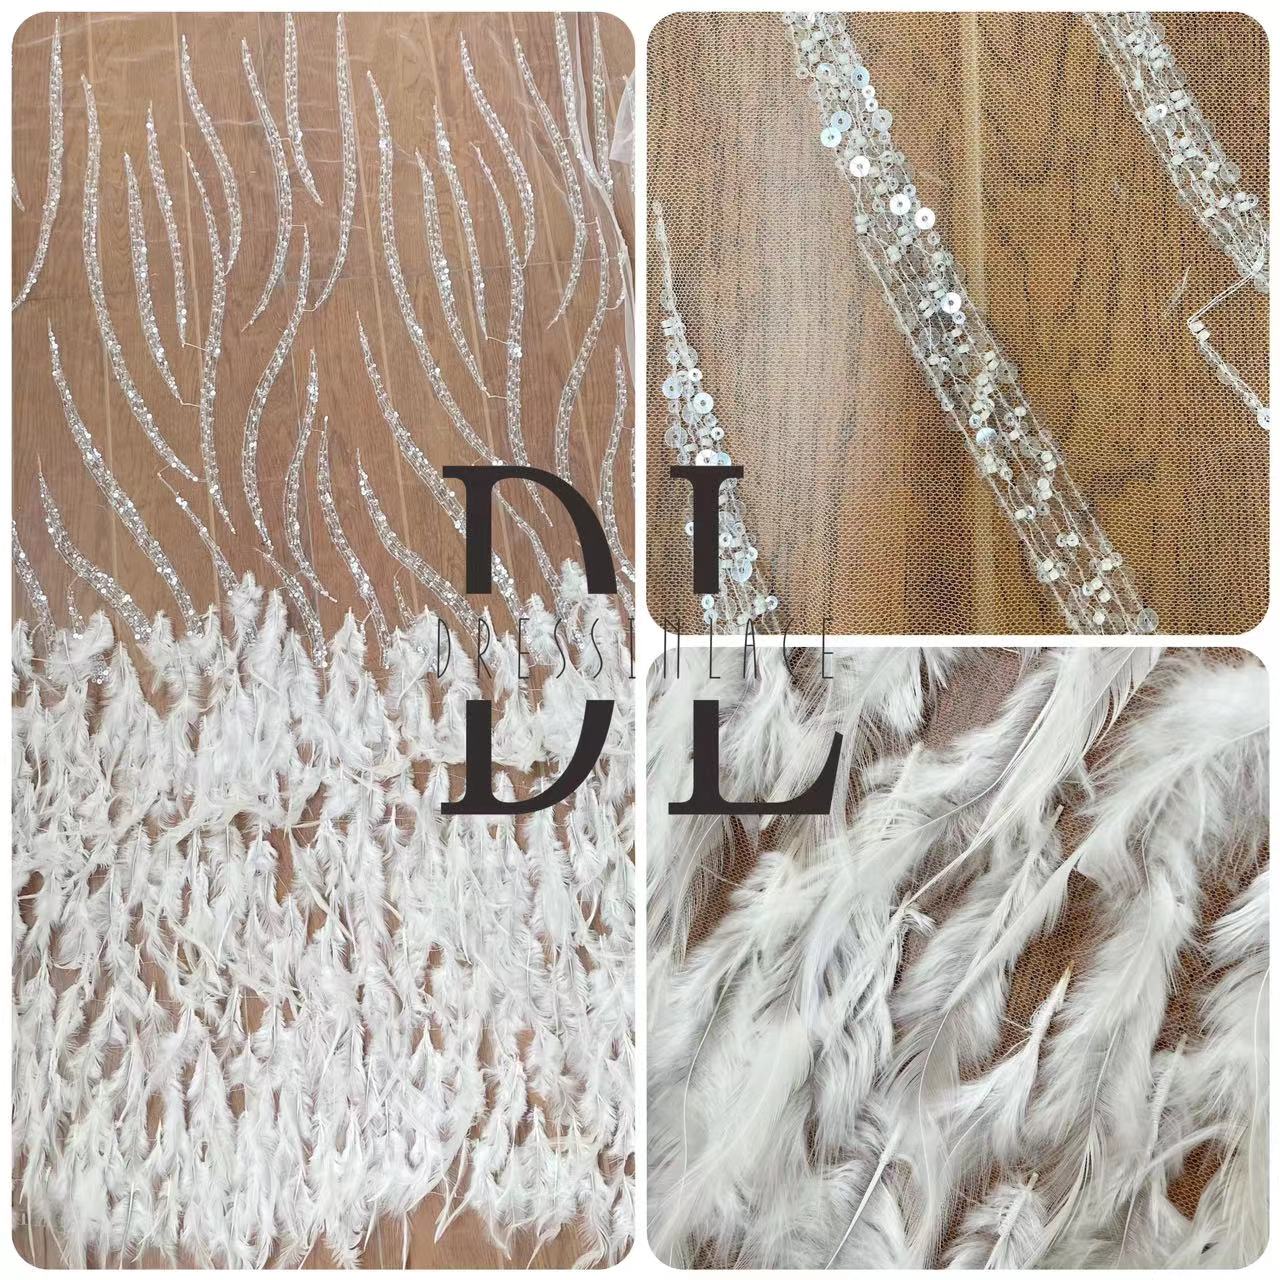 DL130031 Elegant Embroidery Lace Fabric with Shine Beads and Sequins And Soft Feather Stunning Wedding Dress Design DL130031